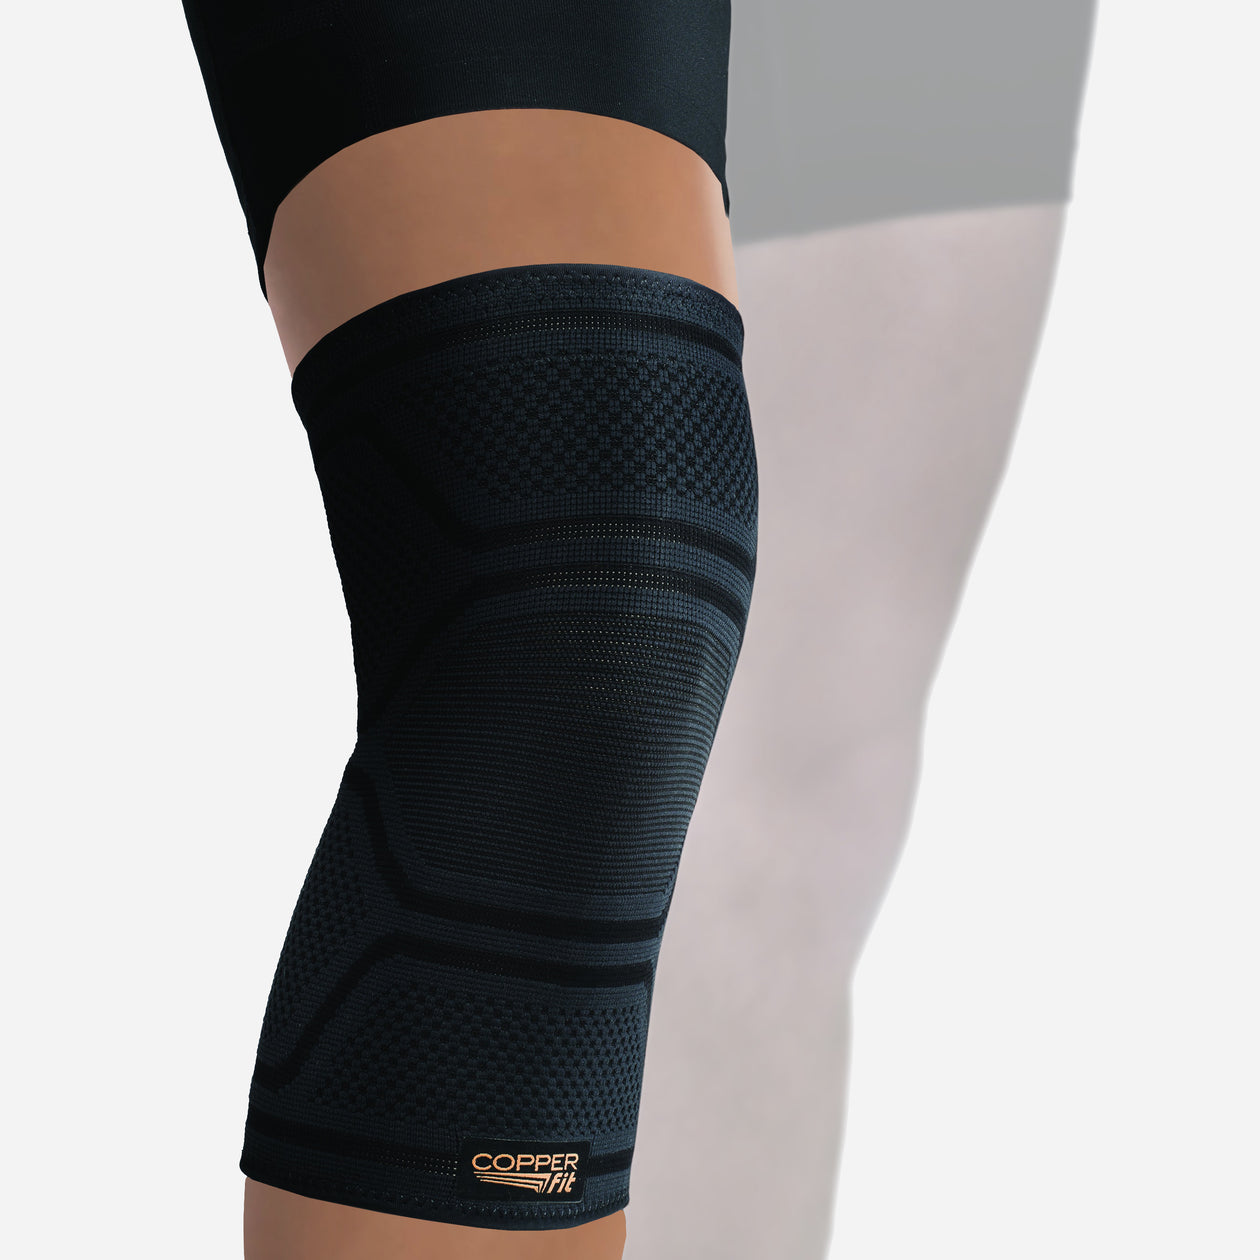 As Seen On Tv Copper Fit Knee Sleeve CH3930 - Canada's best deals on  Electronics, TVs, Unlocked Cell Phones, Macbooks, Laptops, Kitchen  Appliances, Toys, Bed and Bathroom products, Heaters, Humidifiers, Hair  appliances